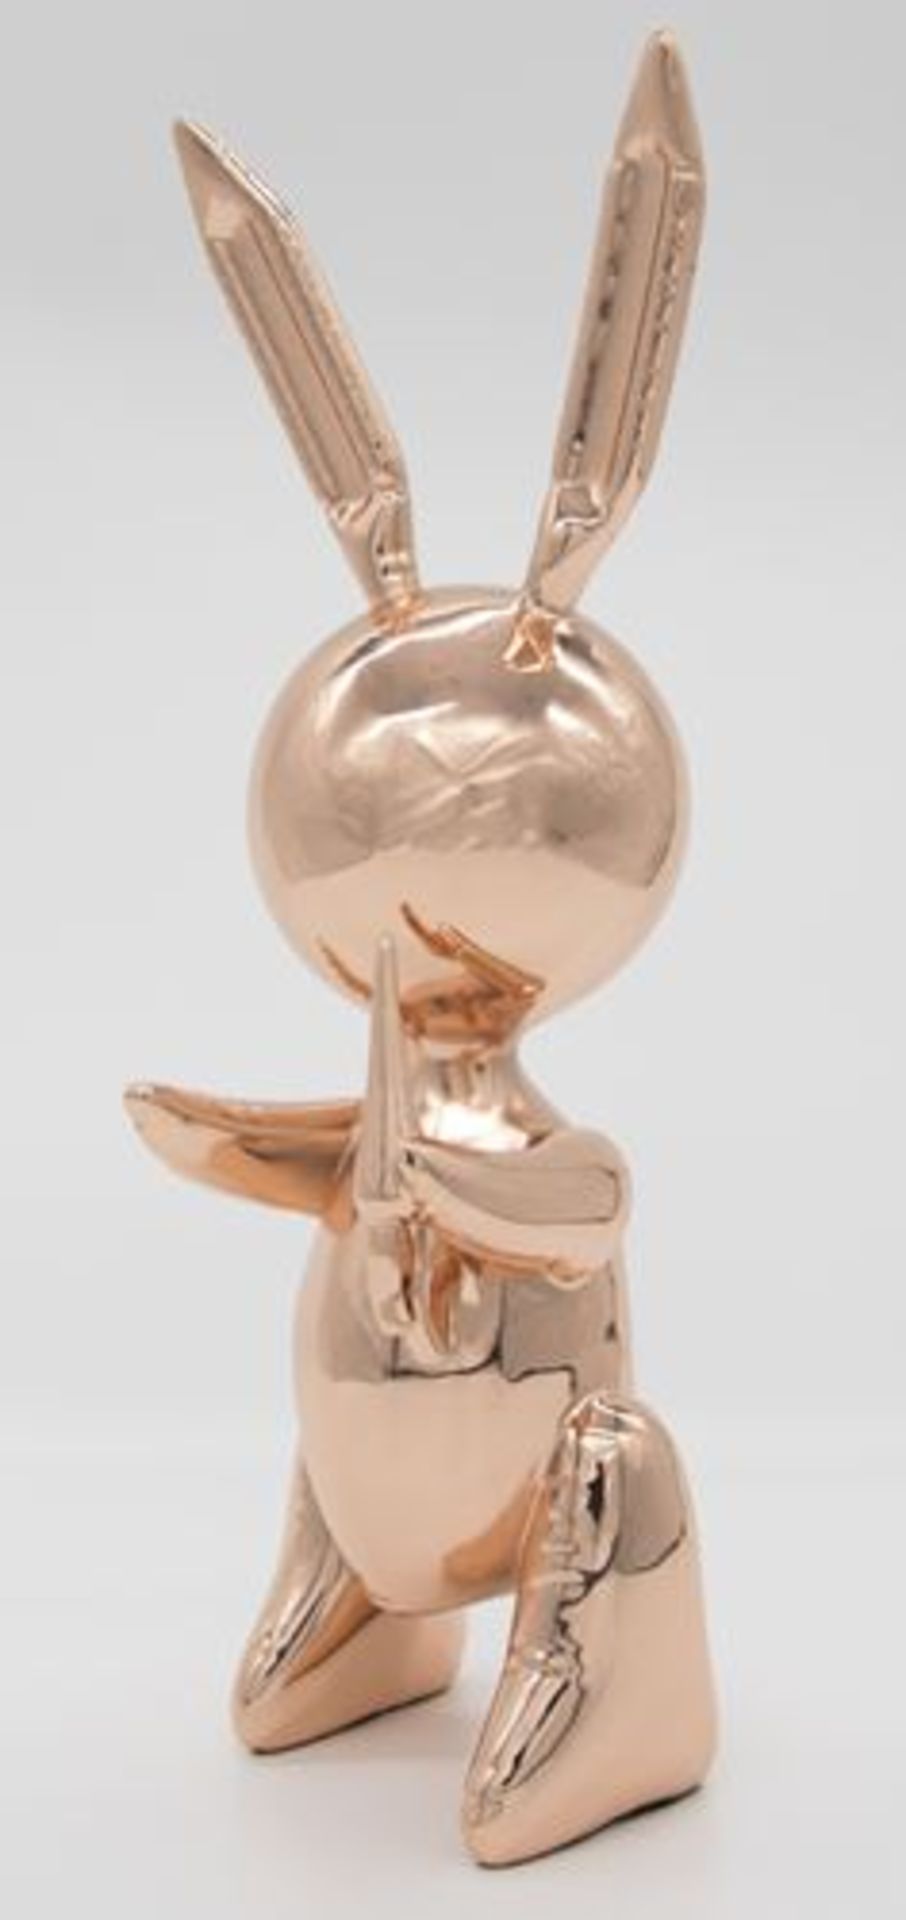 Jeff Koons - After - Rose Gold Rabbit - Zinc alloy Editions Studio Limited edition [...]